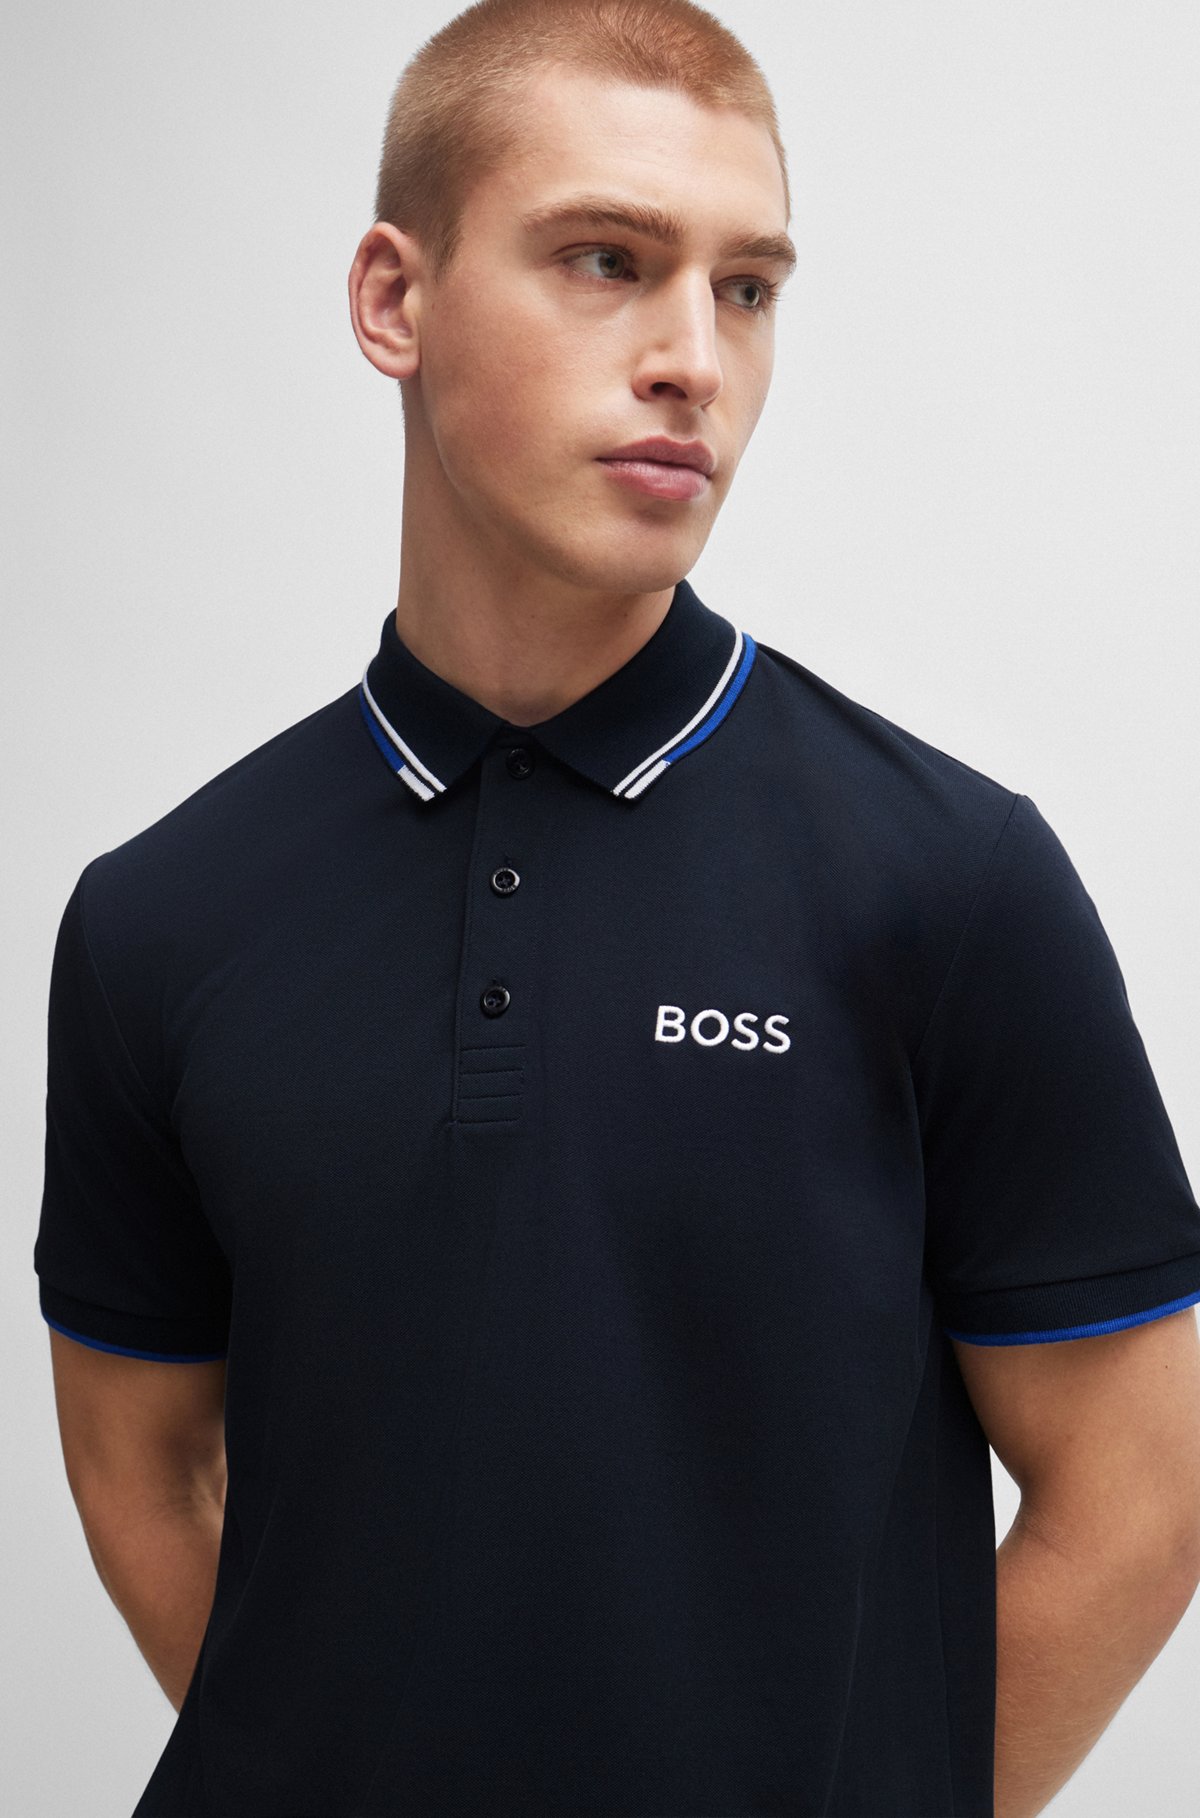 contrast BOSS polo - logos shirt Cotton-blend with